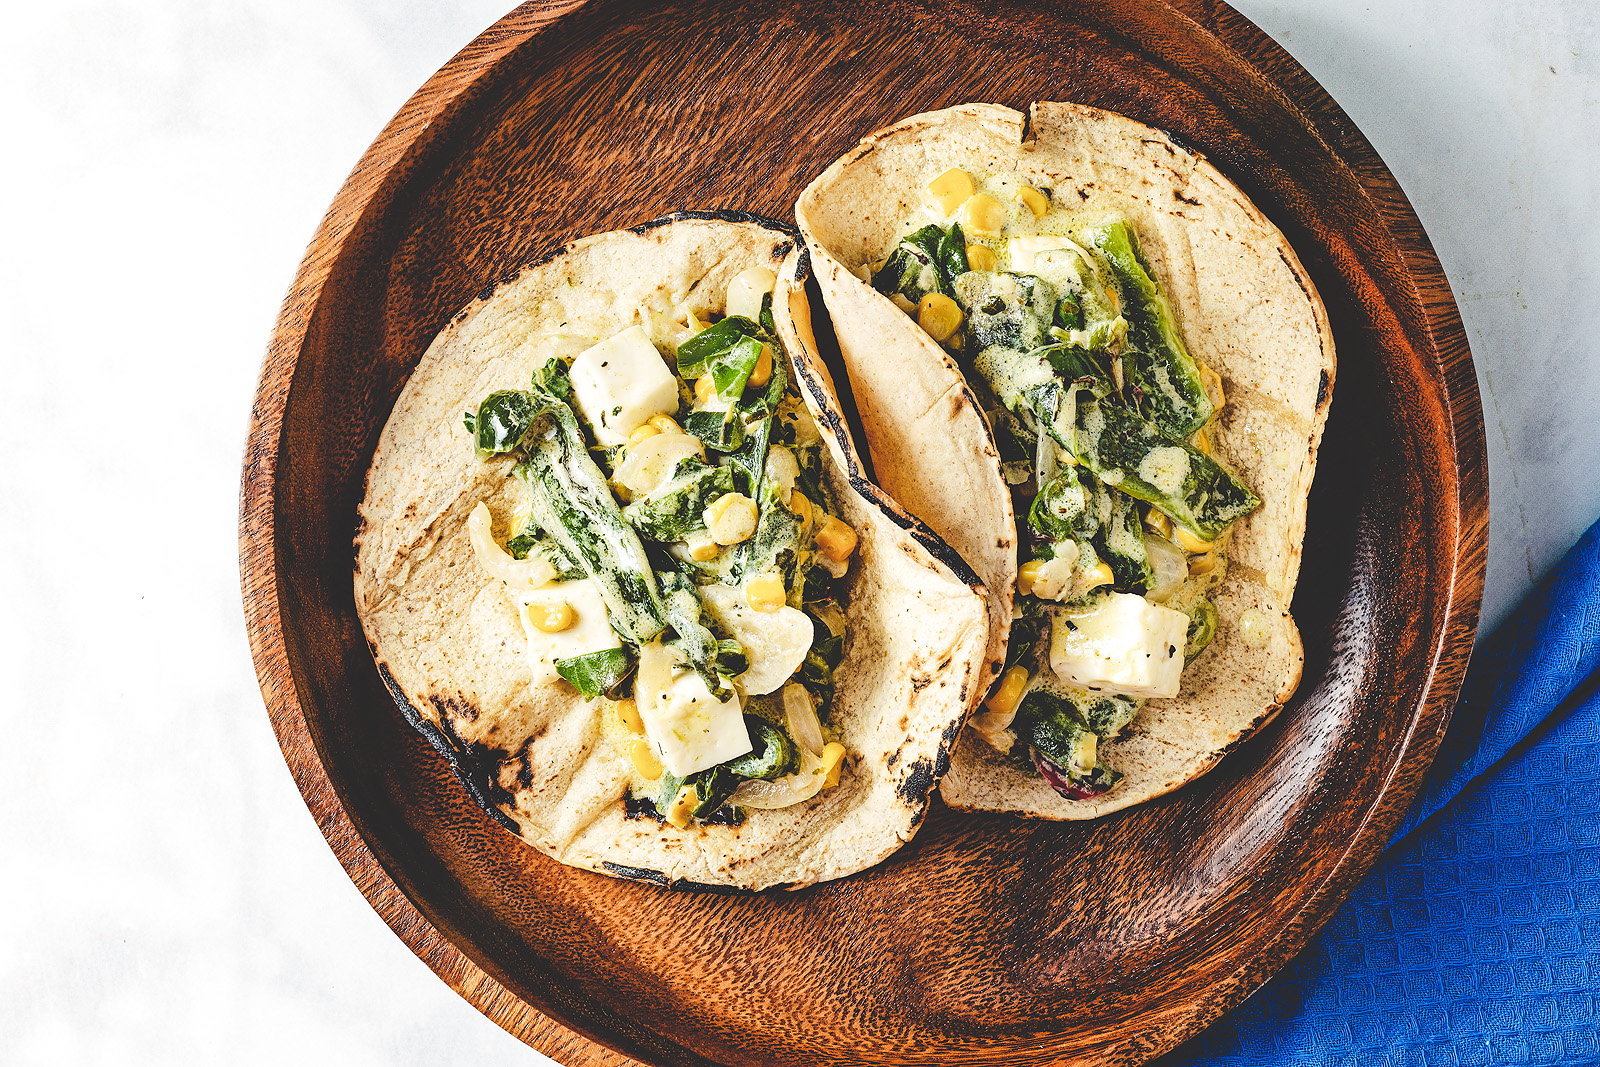 Tacos filled with roasted poblano, corn and chard in cream sauce.